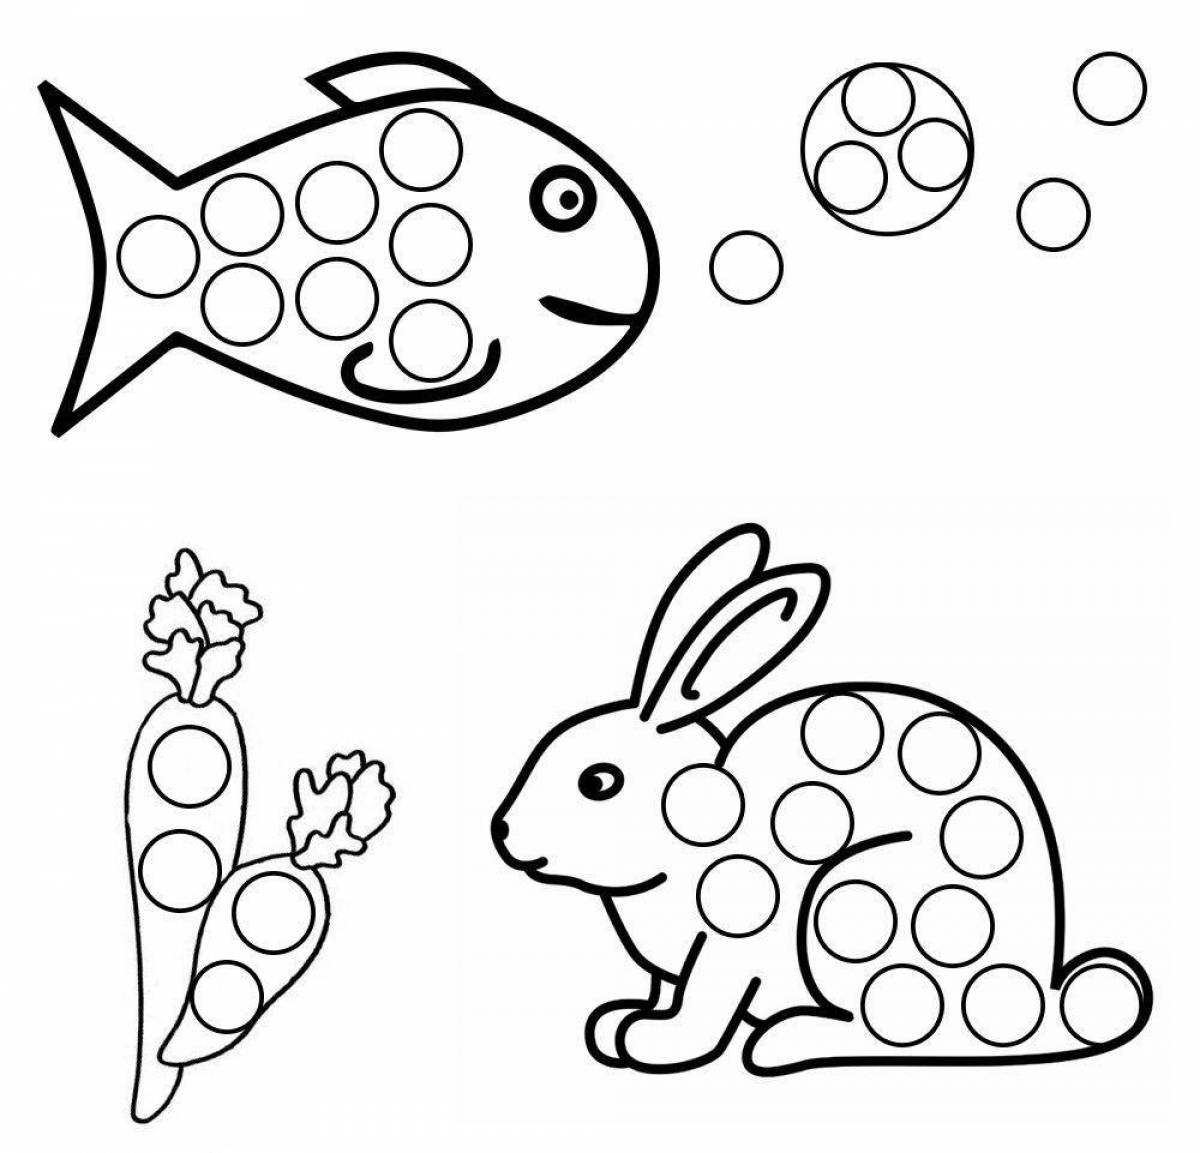 Blissful toddler finger coloring page